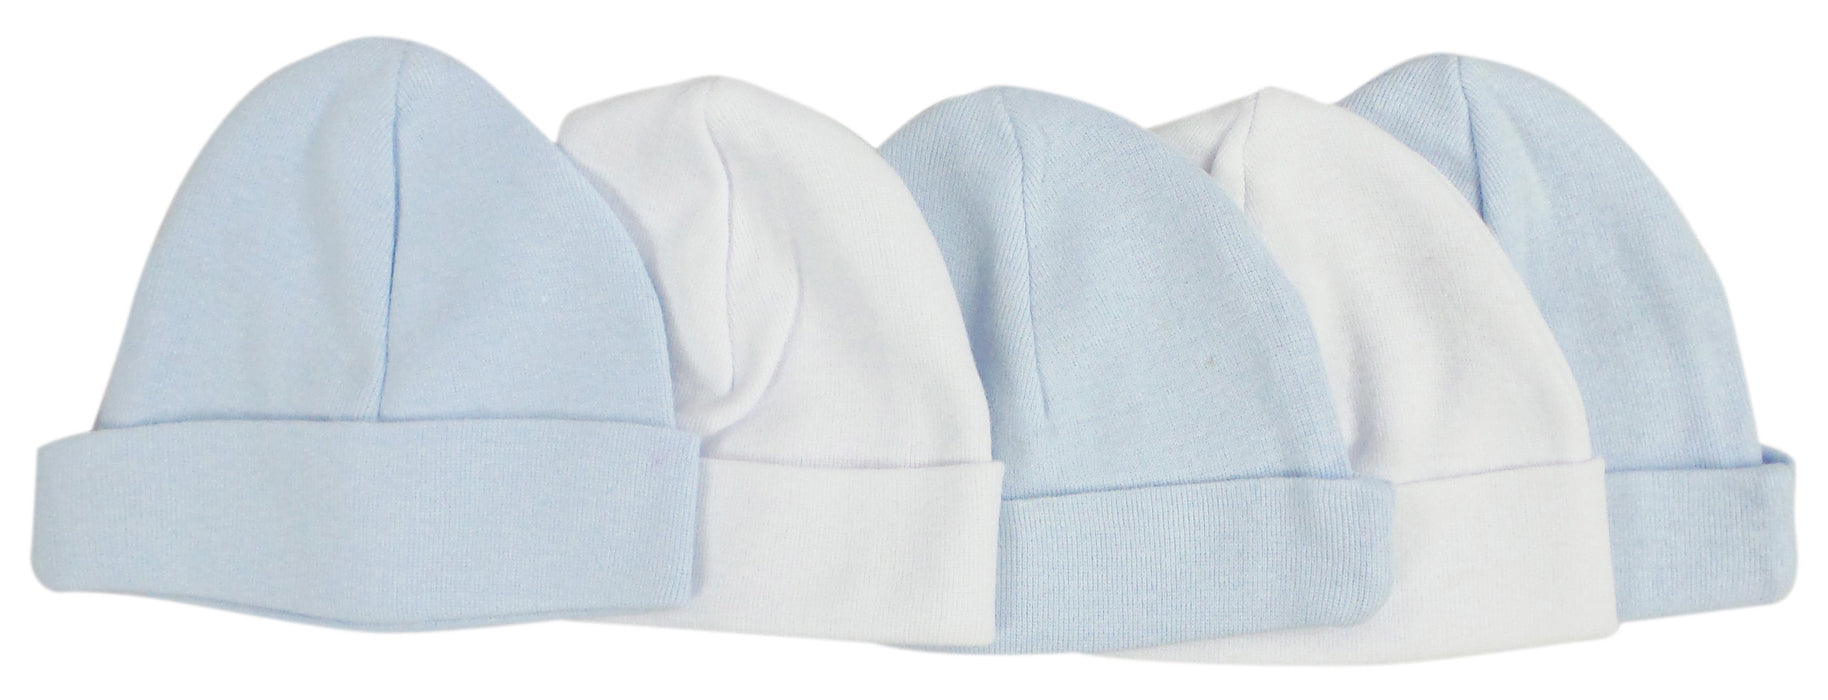 Infant Pastel Blue and White Boys' Beanie - (Pack of 5)